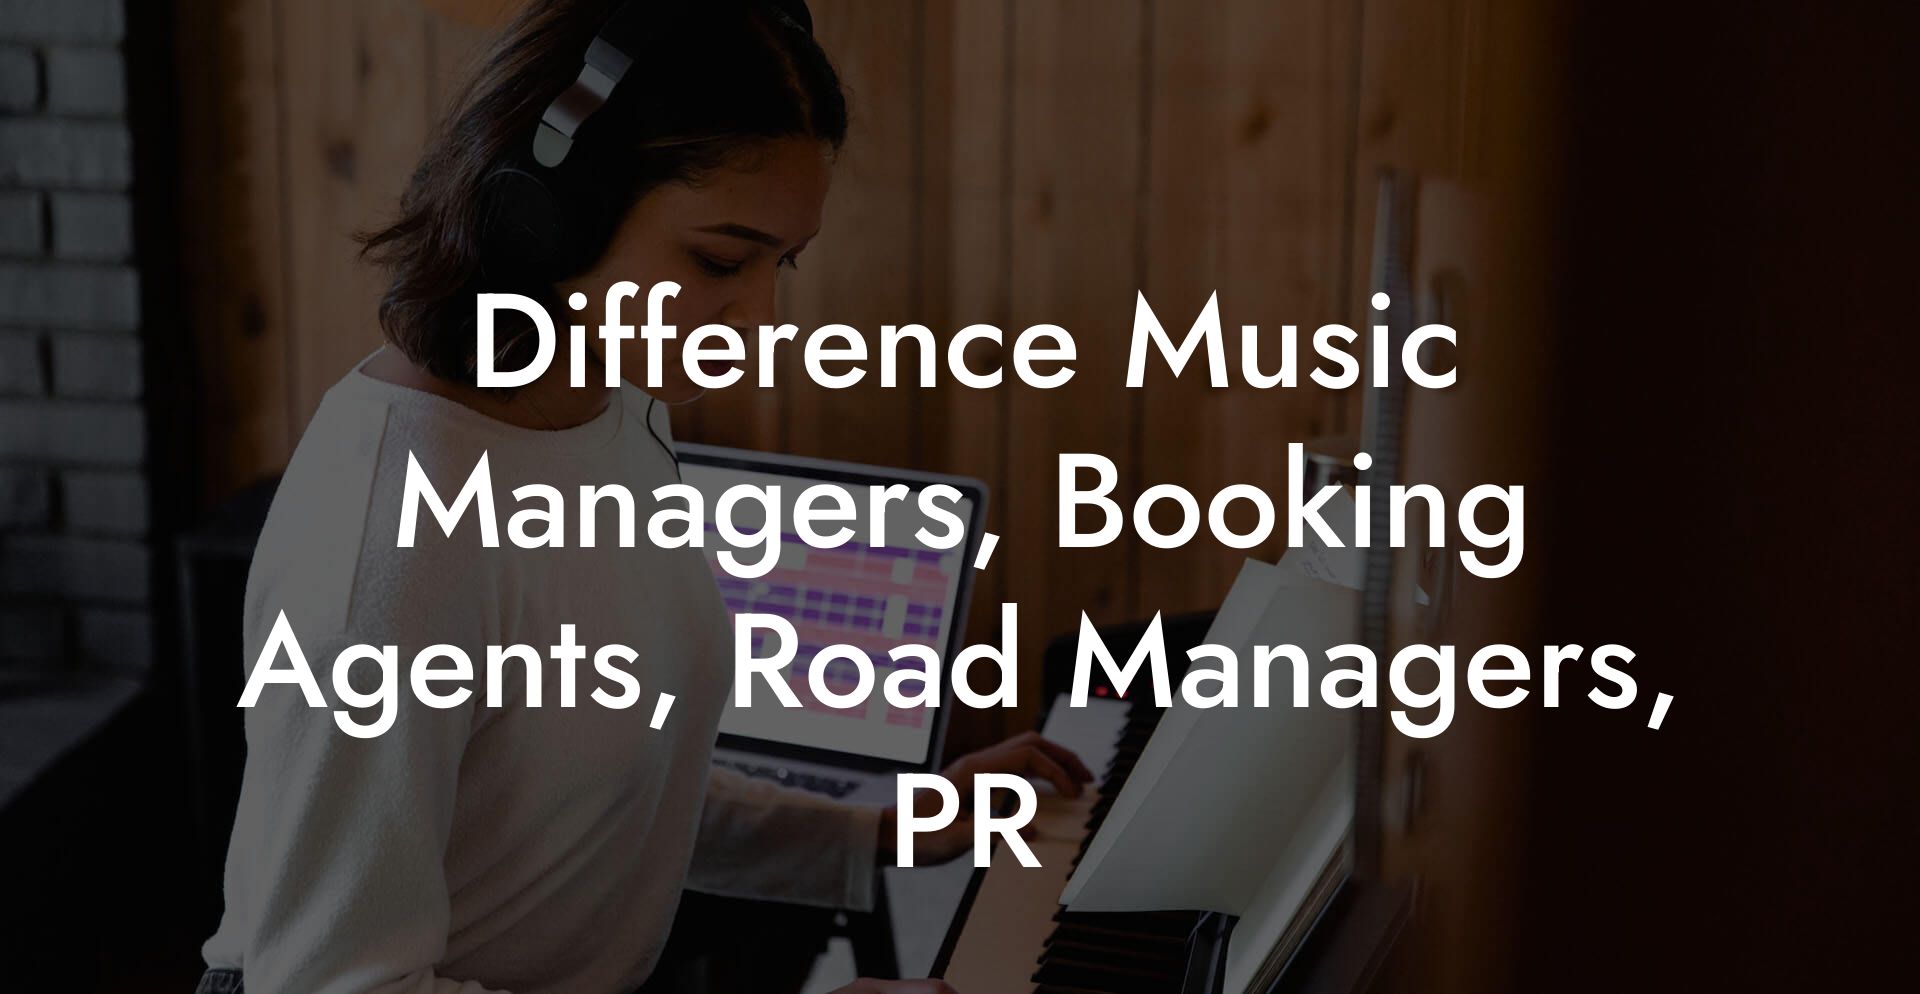 Difference Music Managers, Booking Agents, Road Managers, PR